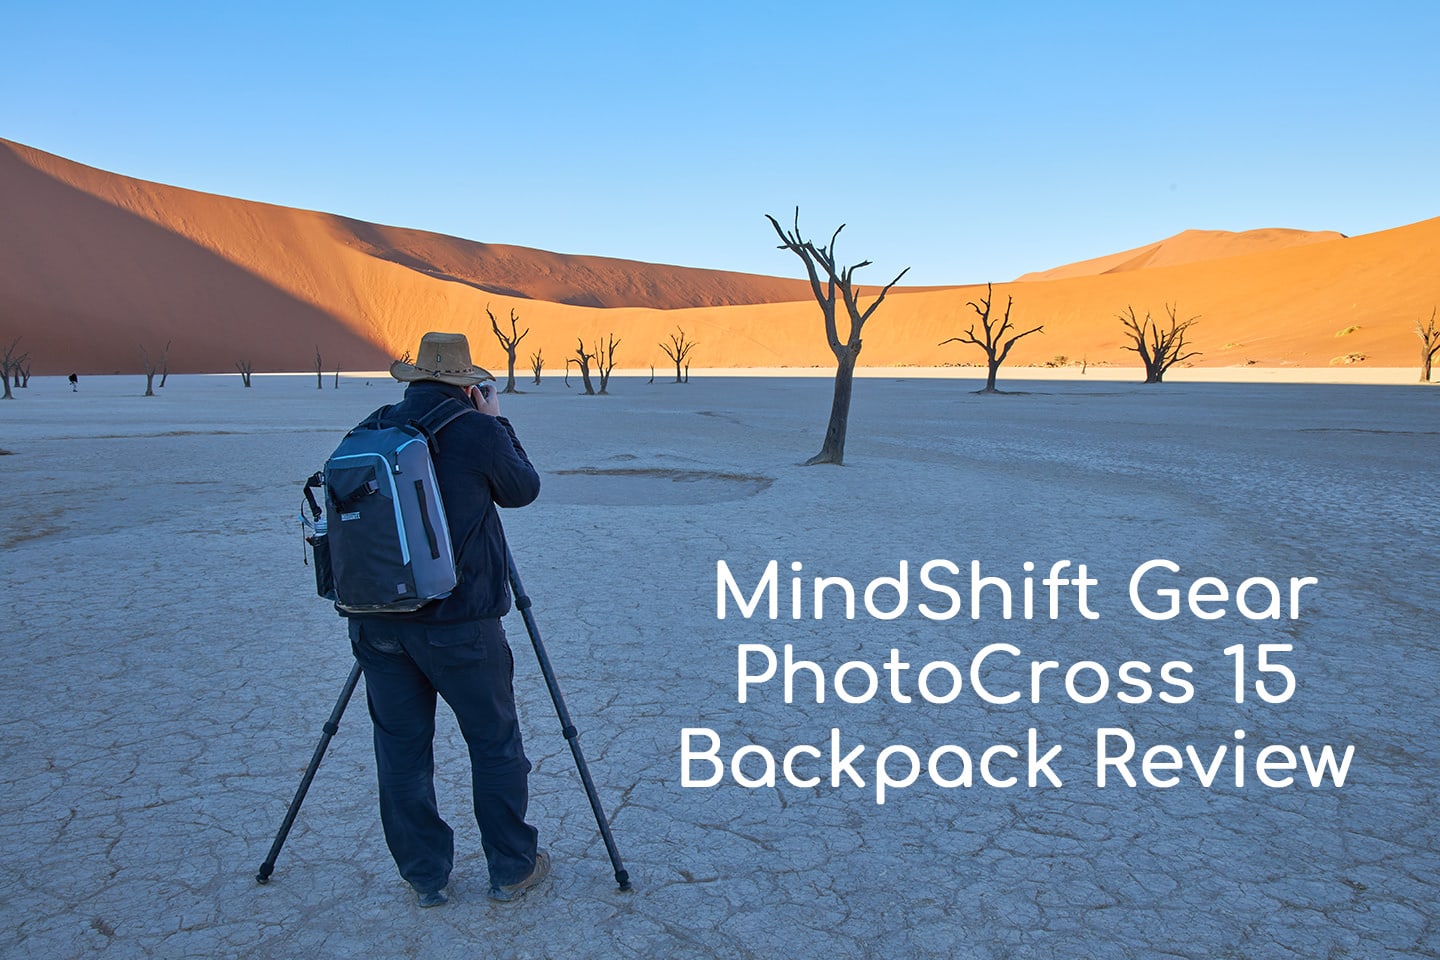 MindShift Gear PhotoCross 15 Backpack Review